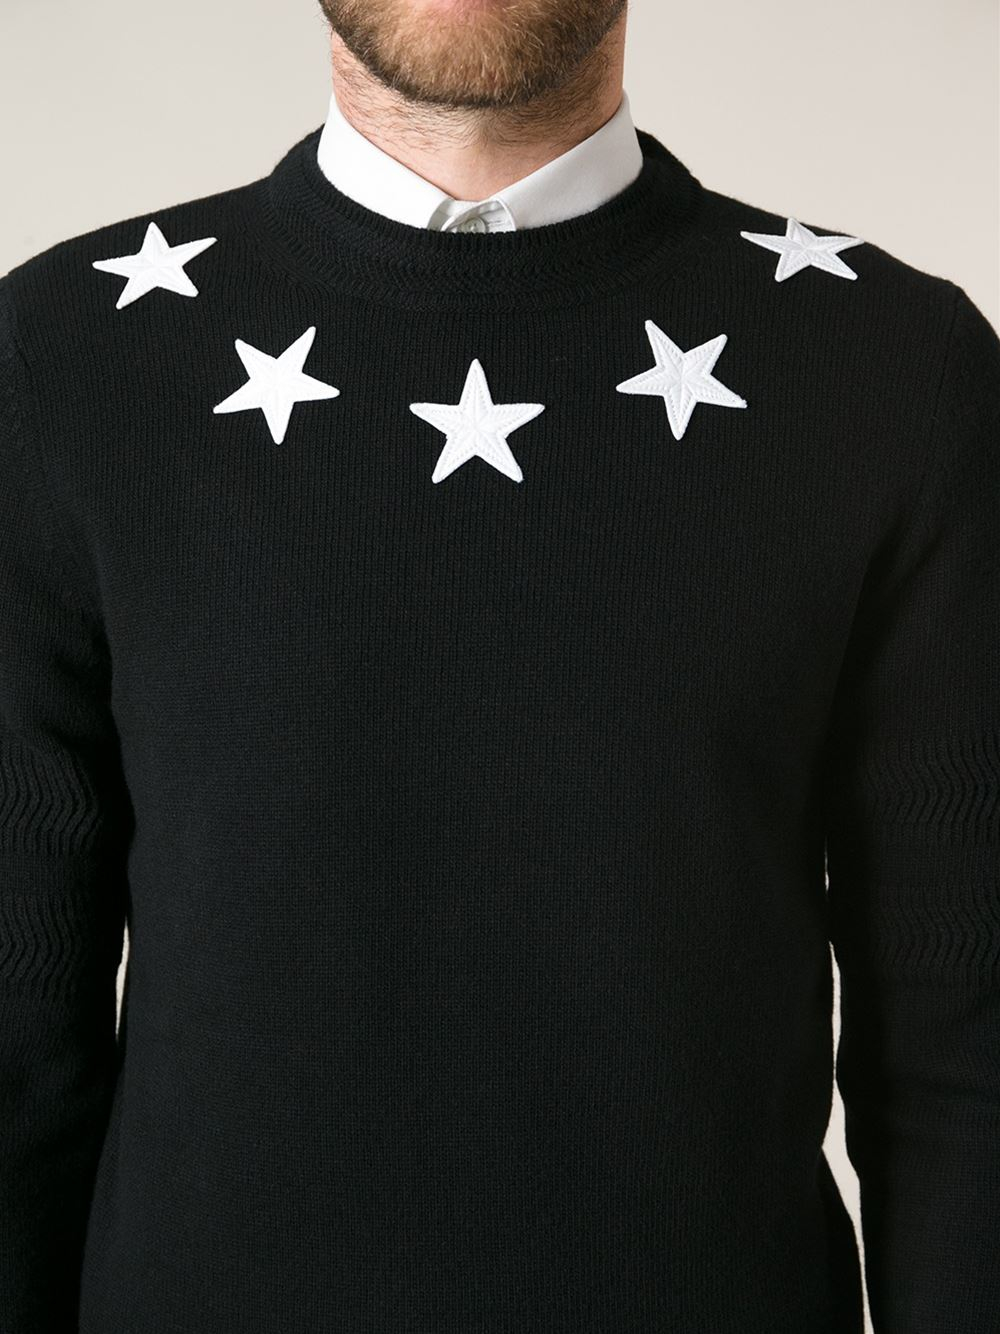 Givenchy Star Sweater in Black for Men 